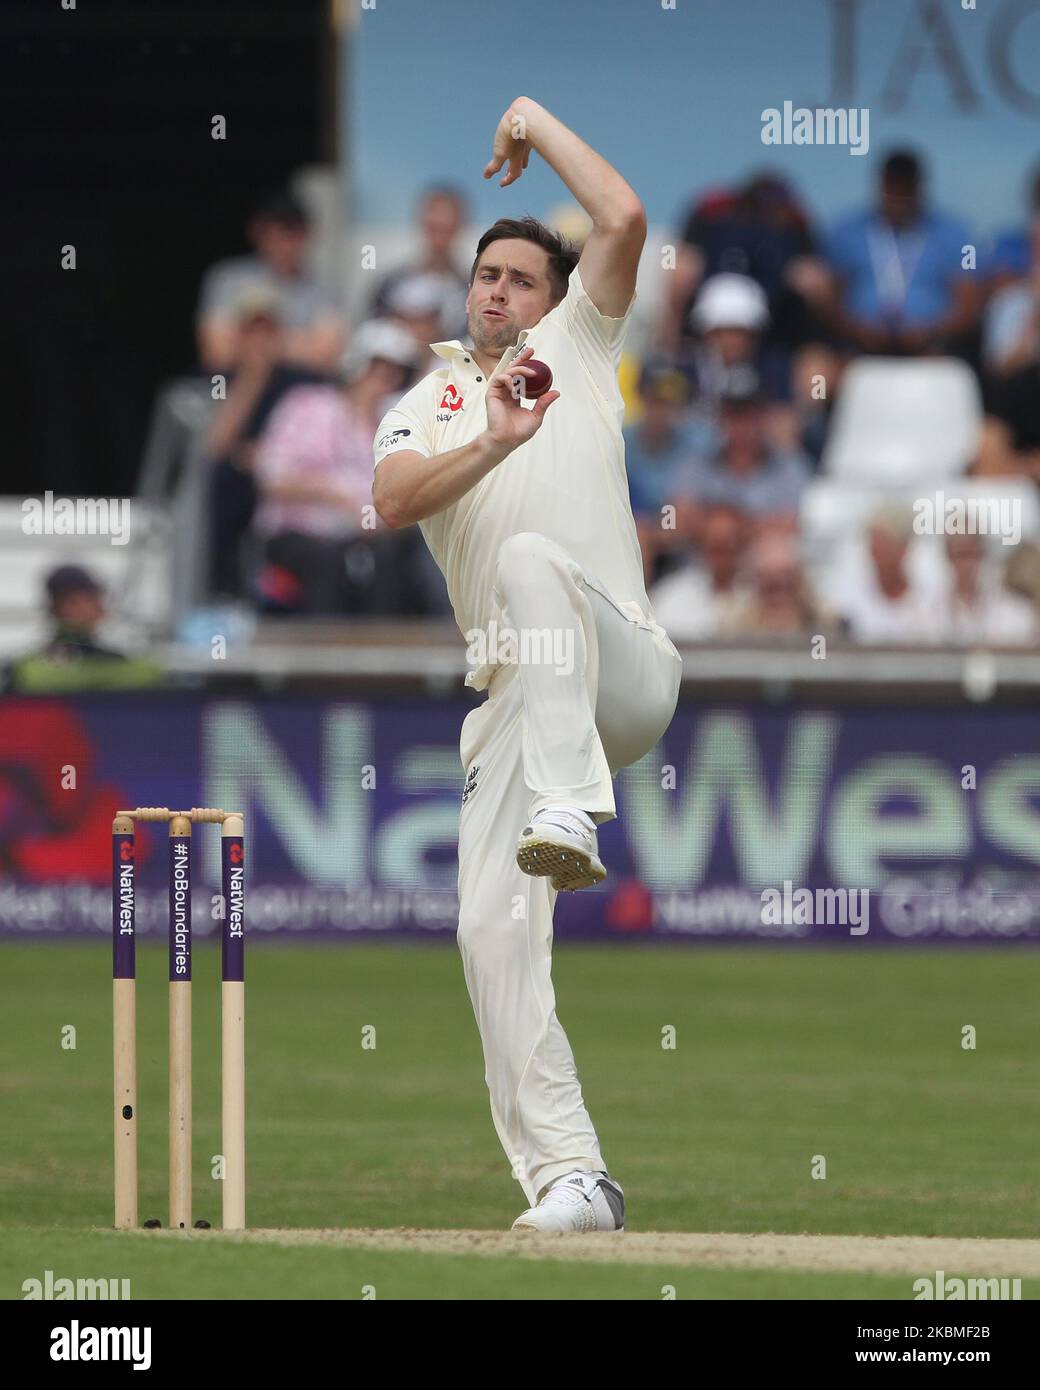 Chris Woakes of England bowling during the first day of the Second Nat West Test match between England and Pakistan at Headingley Cricket Ground, Leeds on Friday 1st June 2018. (Photo by Mark Fletcher/MI News/NurPhoto) Stock Photo